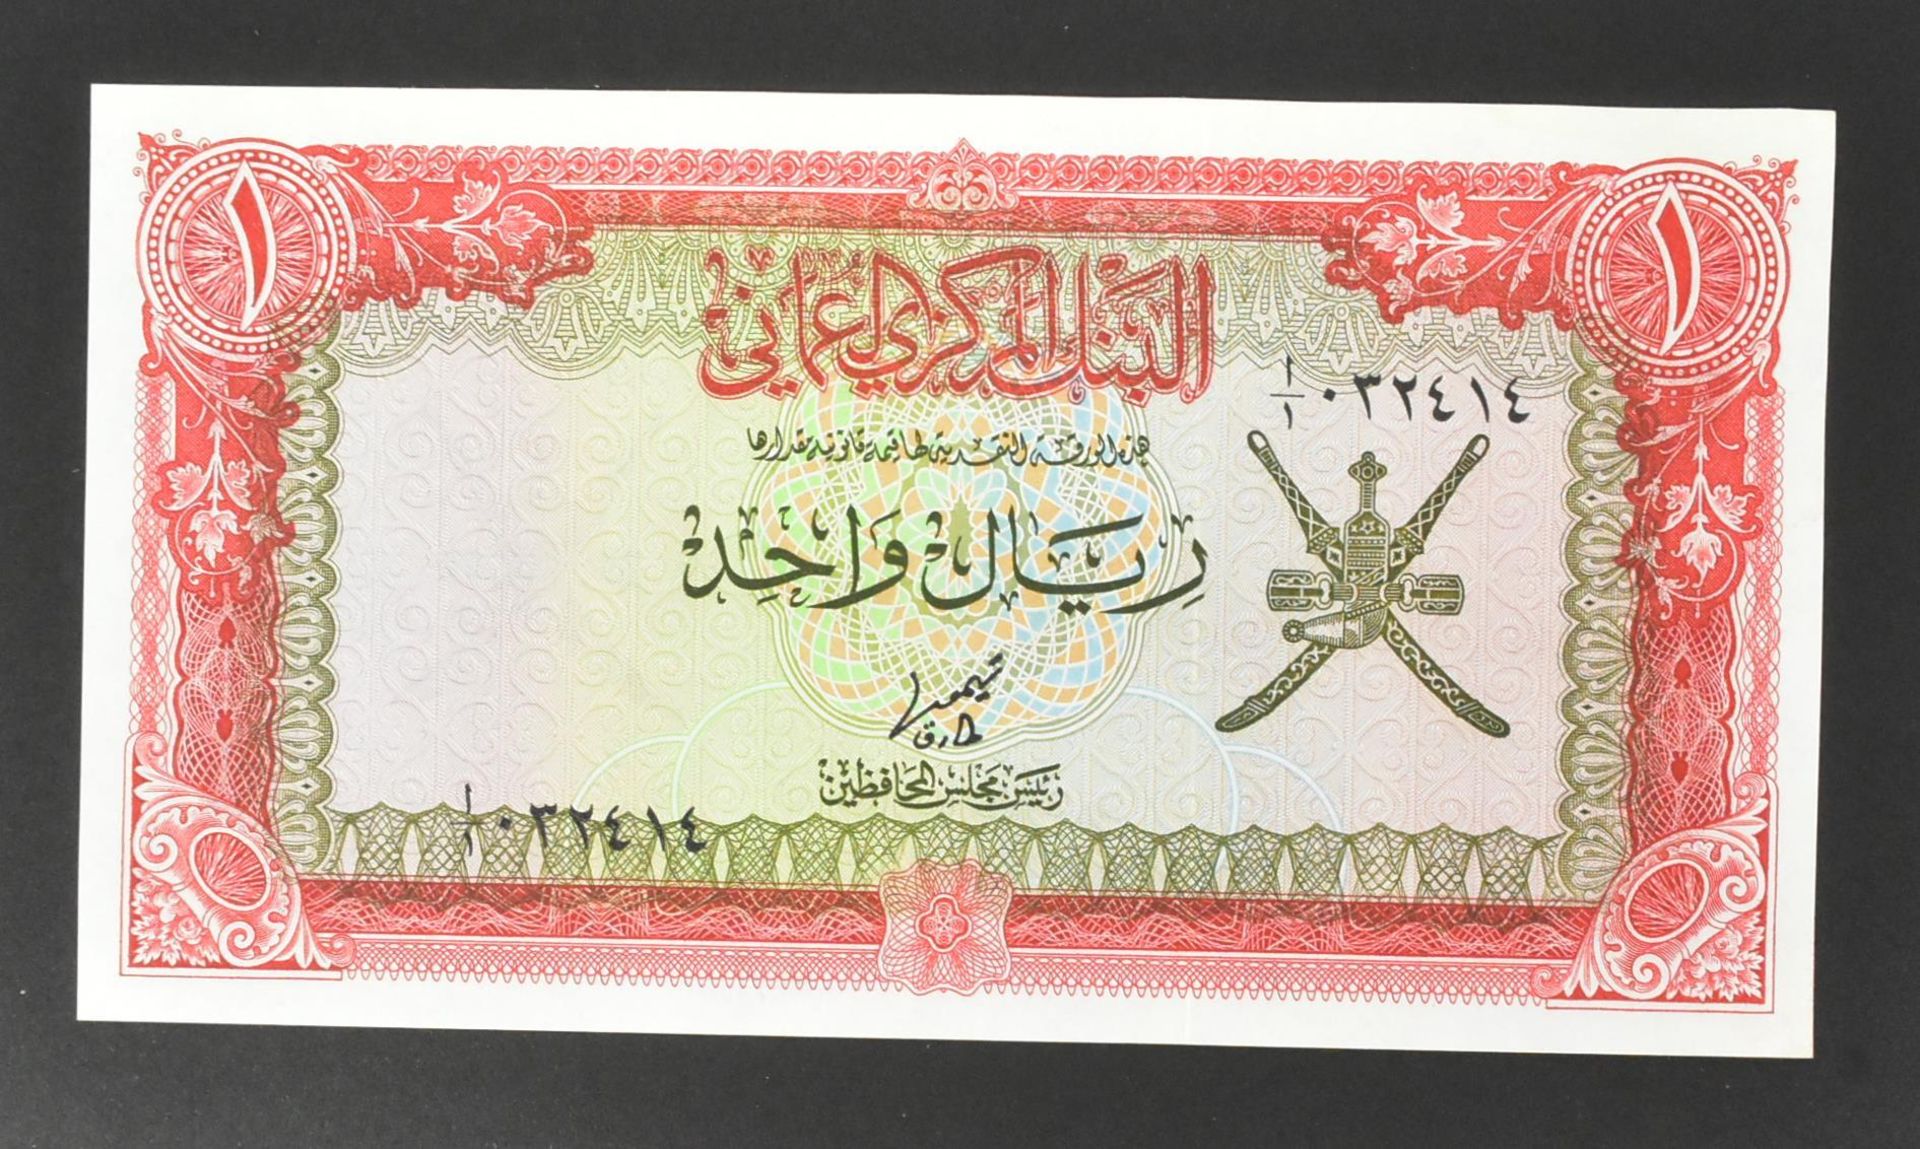 COLLECTION OF INTERNATIONAL UNCIRCULATED BANK NOTES - OMAN - Image 7 of 51